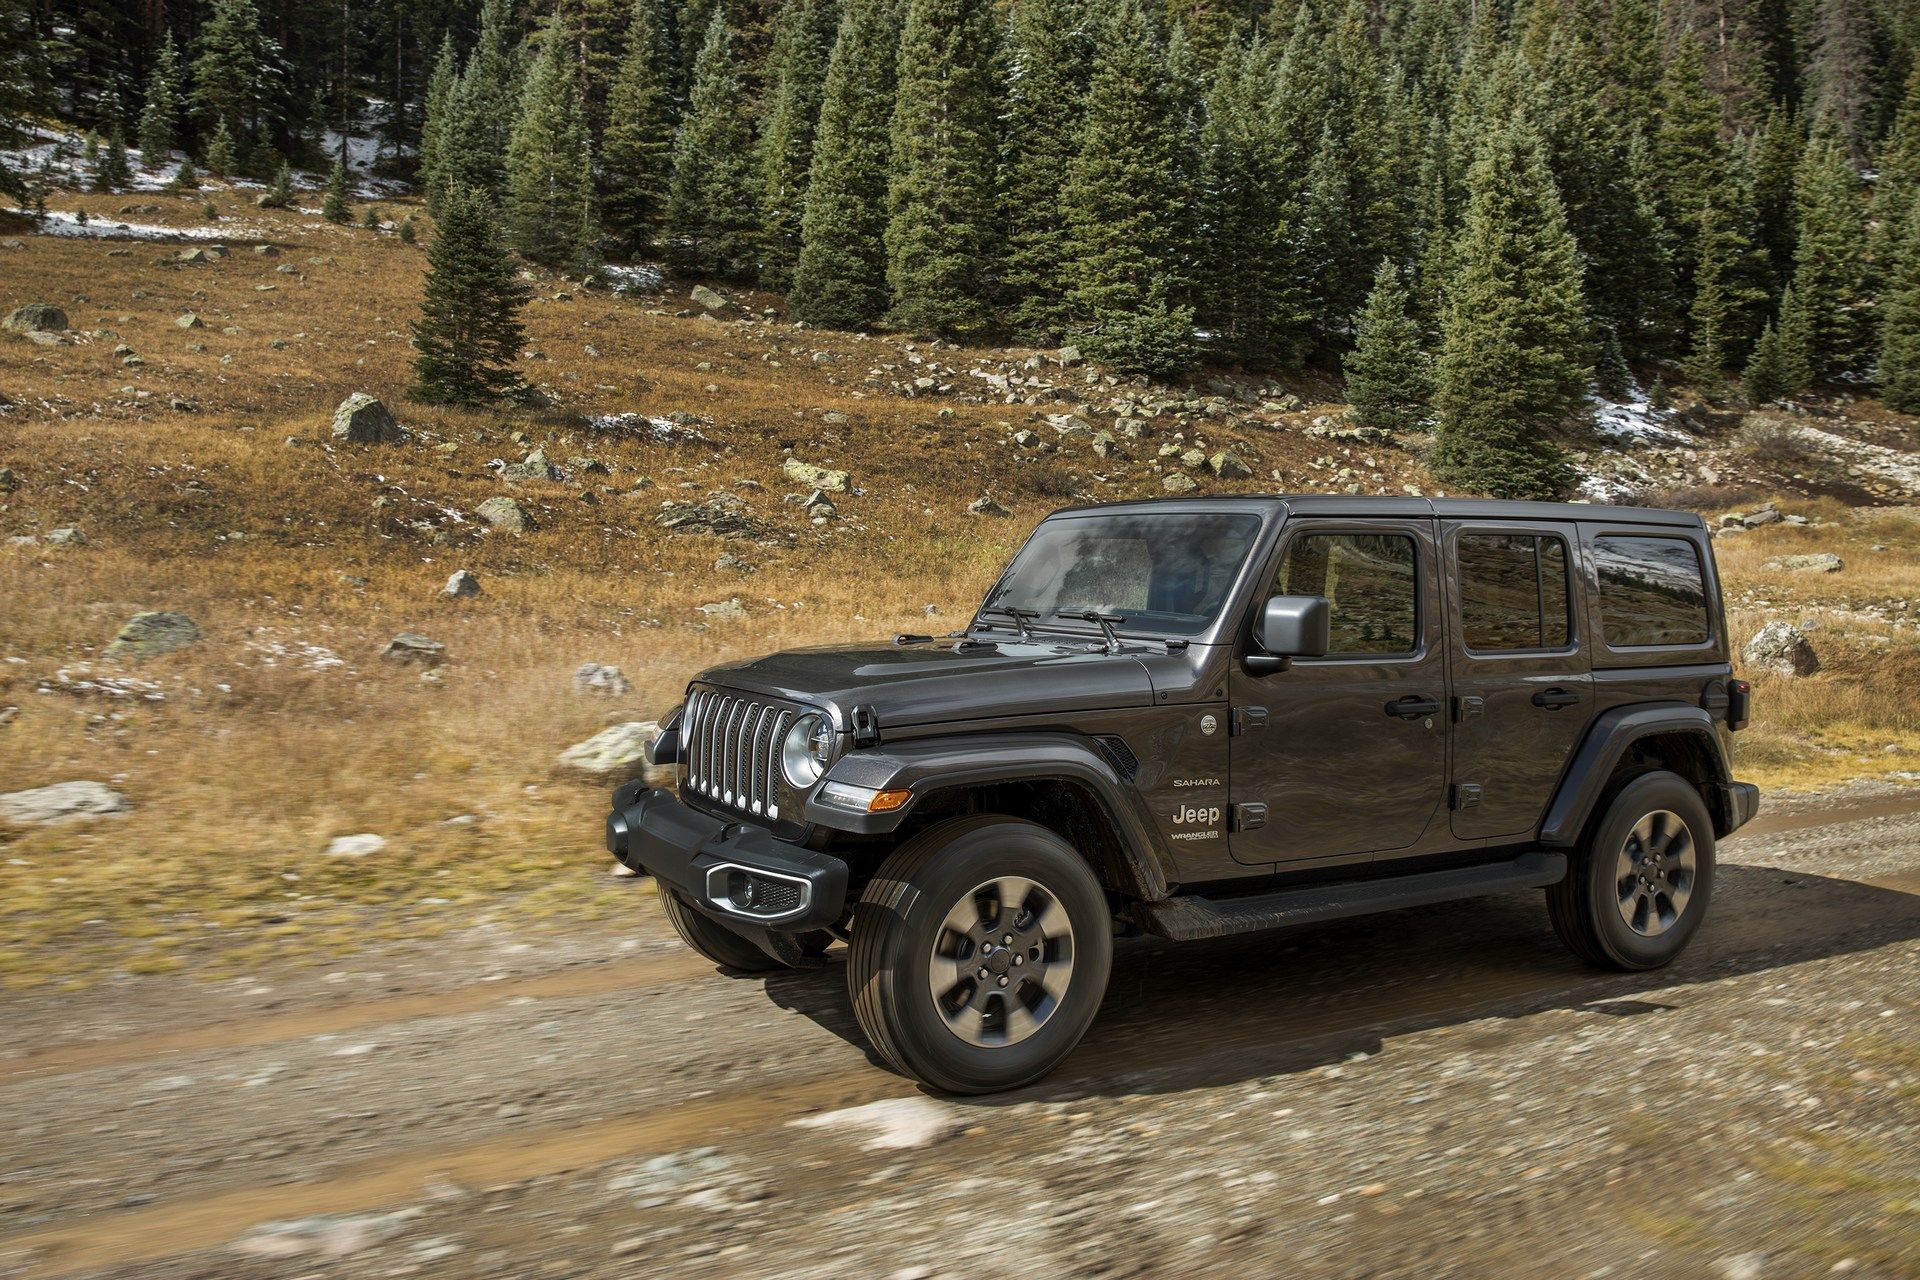 2018 Jeep Wrangler Turbo Four Engine Improves Fuel Economy But Costs $3,000  | Carscoops